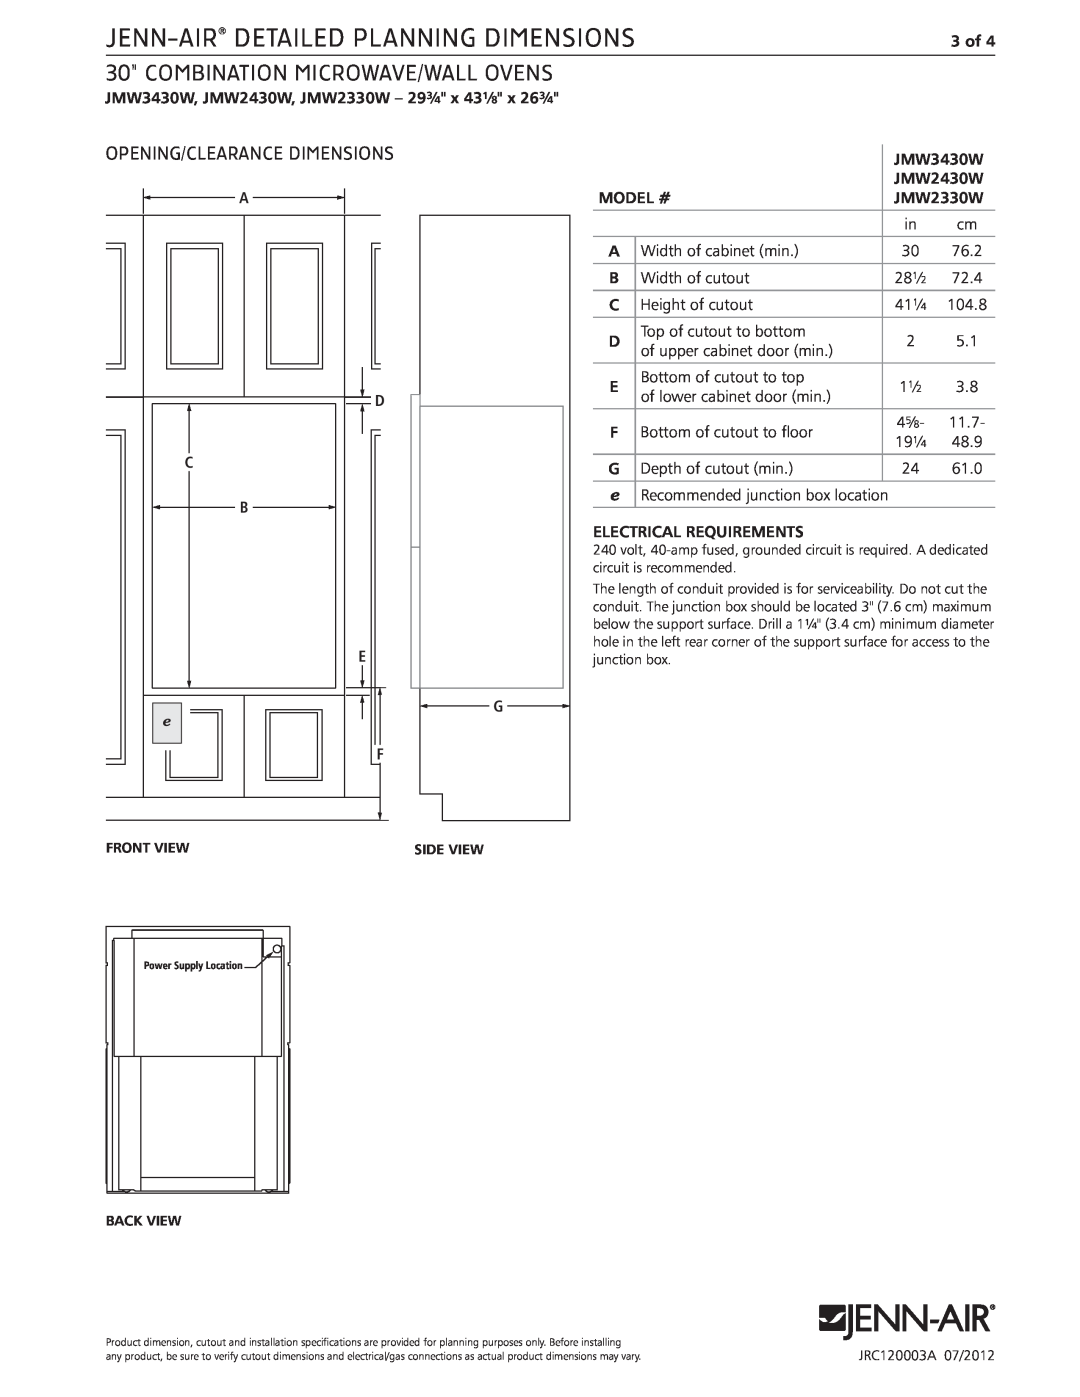 Jenn-Air JMW3430W Opening/Clearance Dimensions, Jenn-Air Detailed Planning Dimensions, combination microwave/wall ovens 